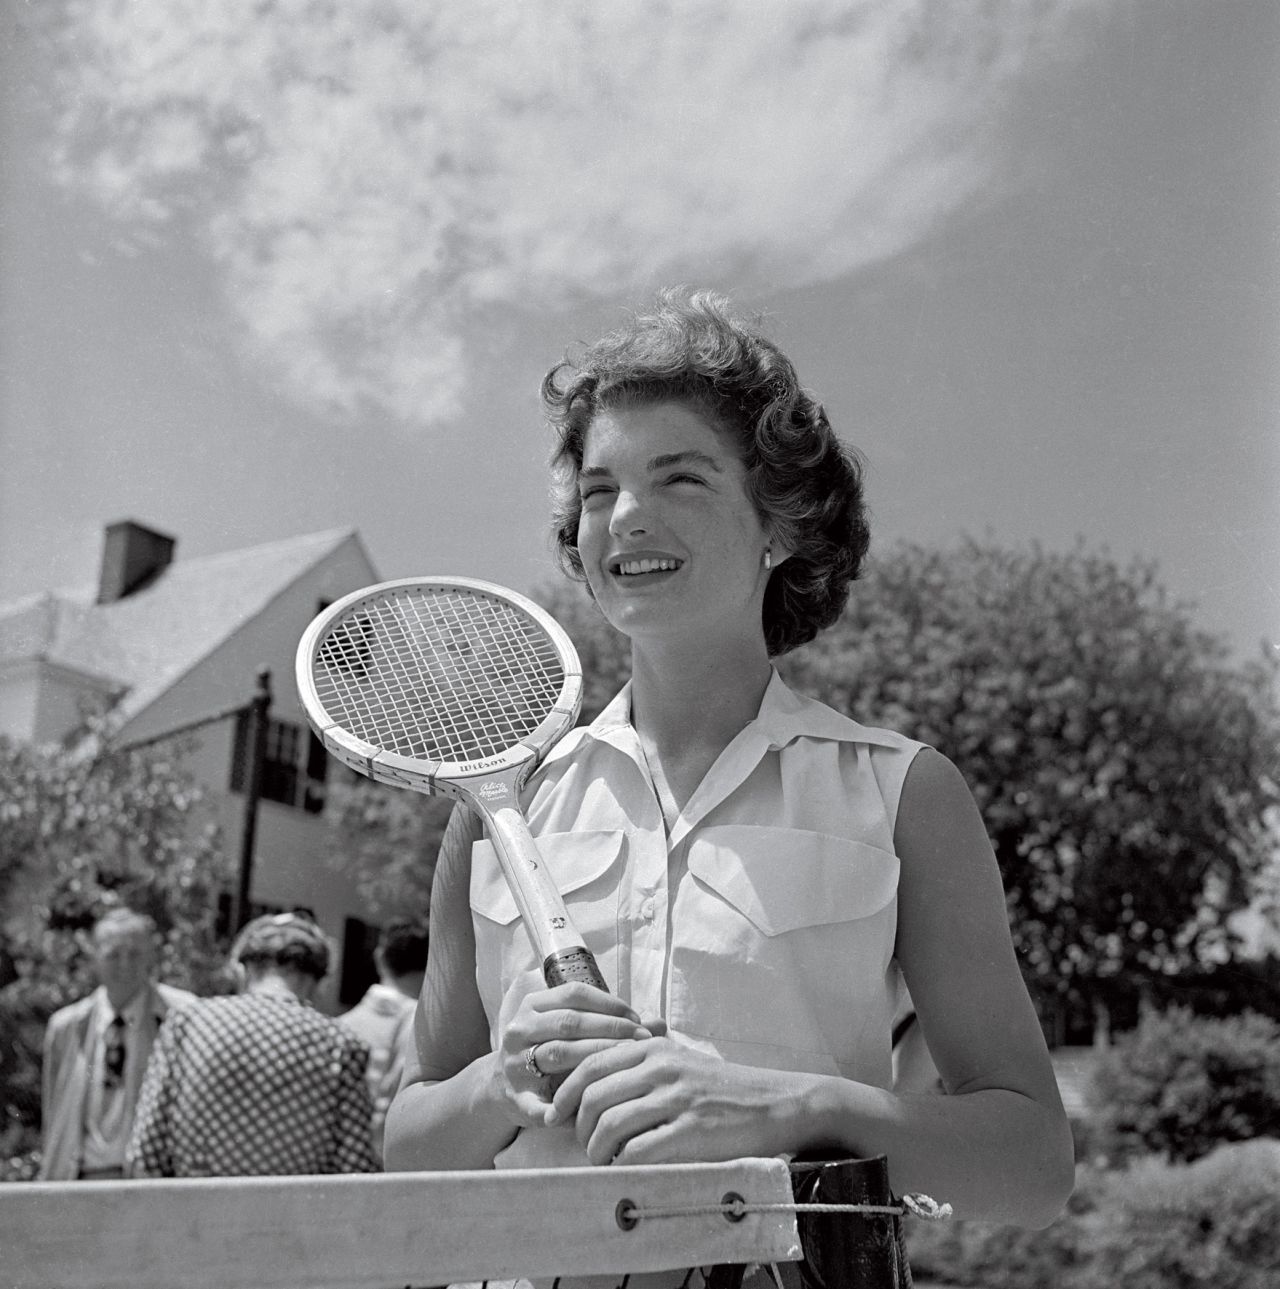 Former U.S. First Lady Jackie Kennedy adds a touch of glamor to the sport in 1953. The image also features in the book,<a href="http://www.teneues.com/shop-int/the-stylish-life-tennis2.html" target="_blank" target="_blank"> "The Stylish Life: Tennis,"</a> published by teNeues, courtesy Hulton-Deutsch Collection/CORBIS.